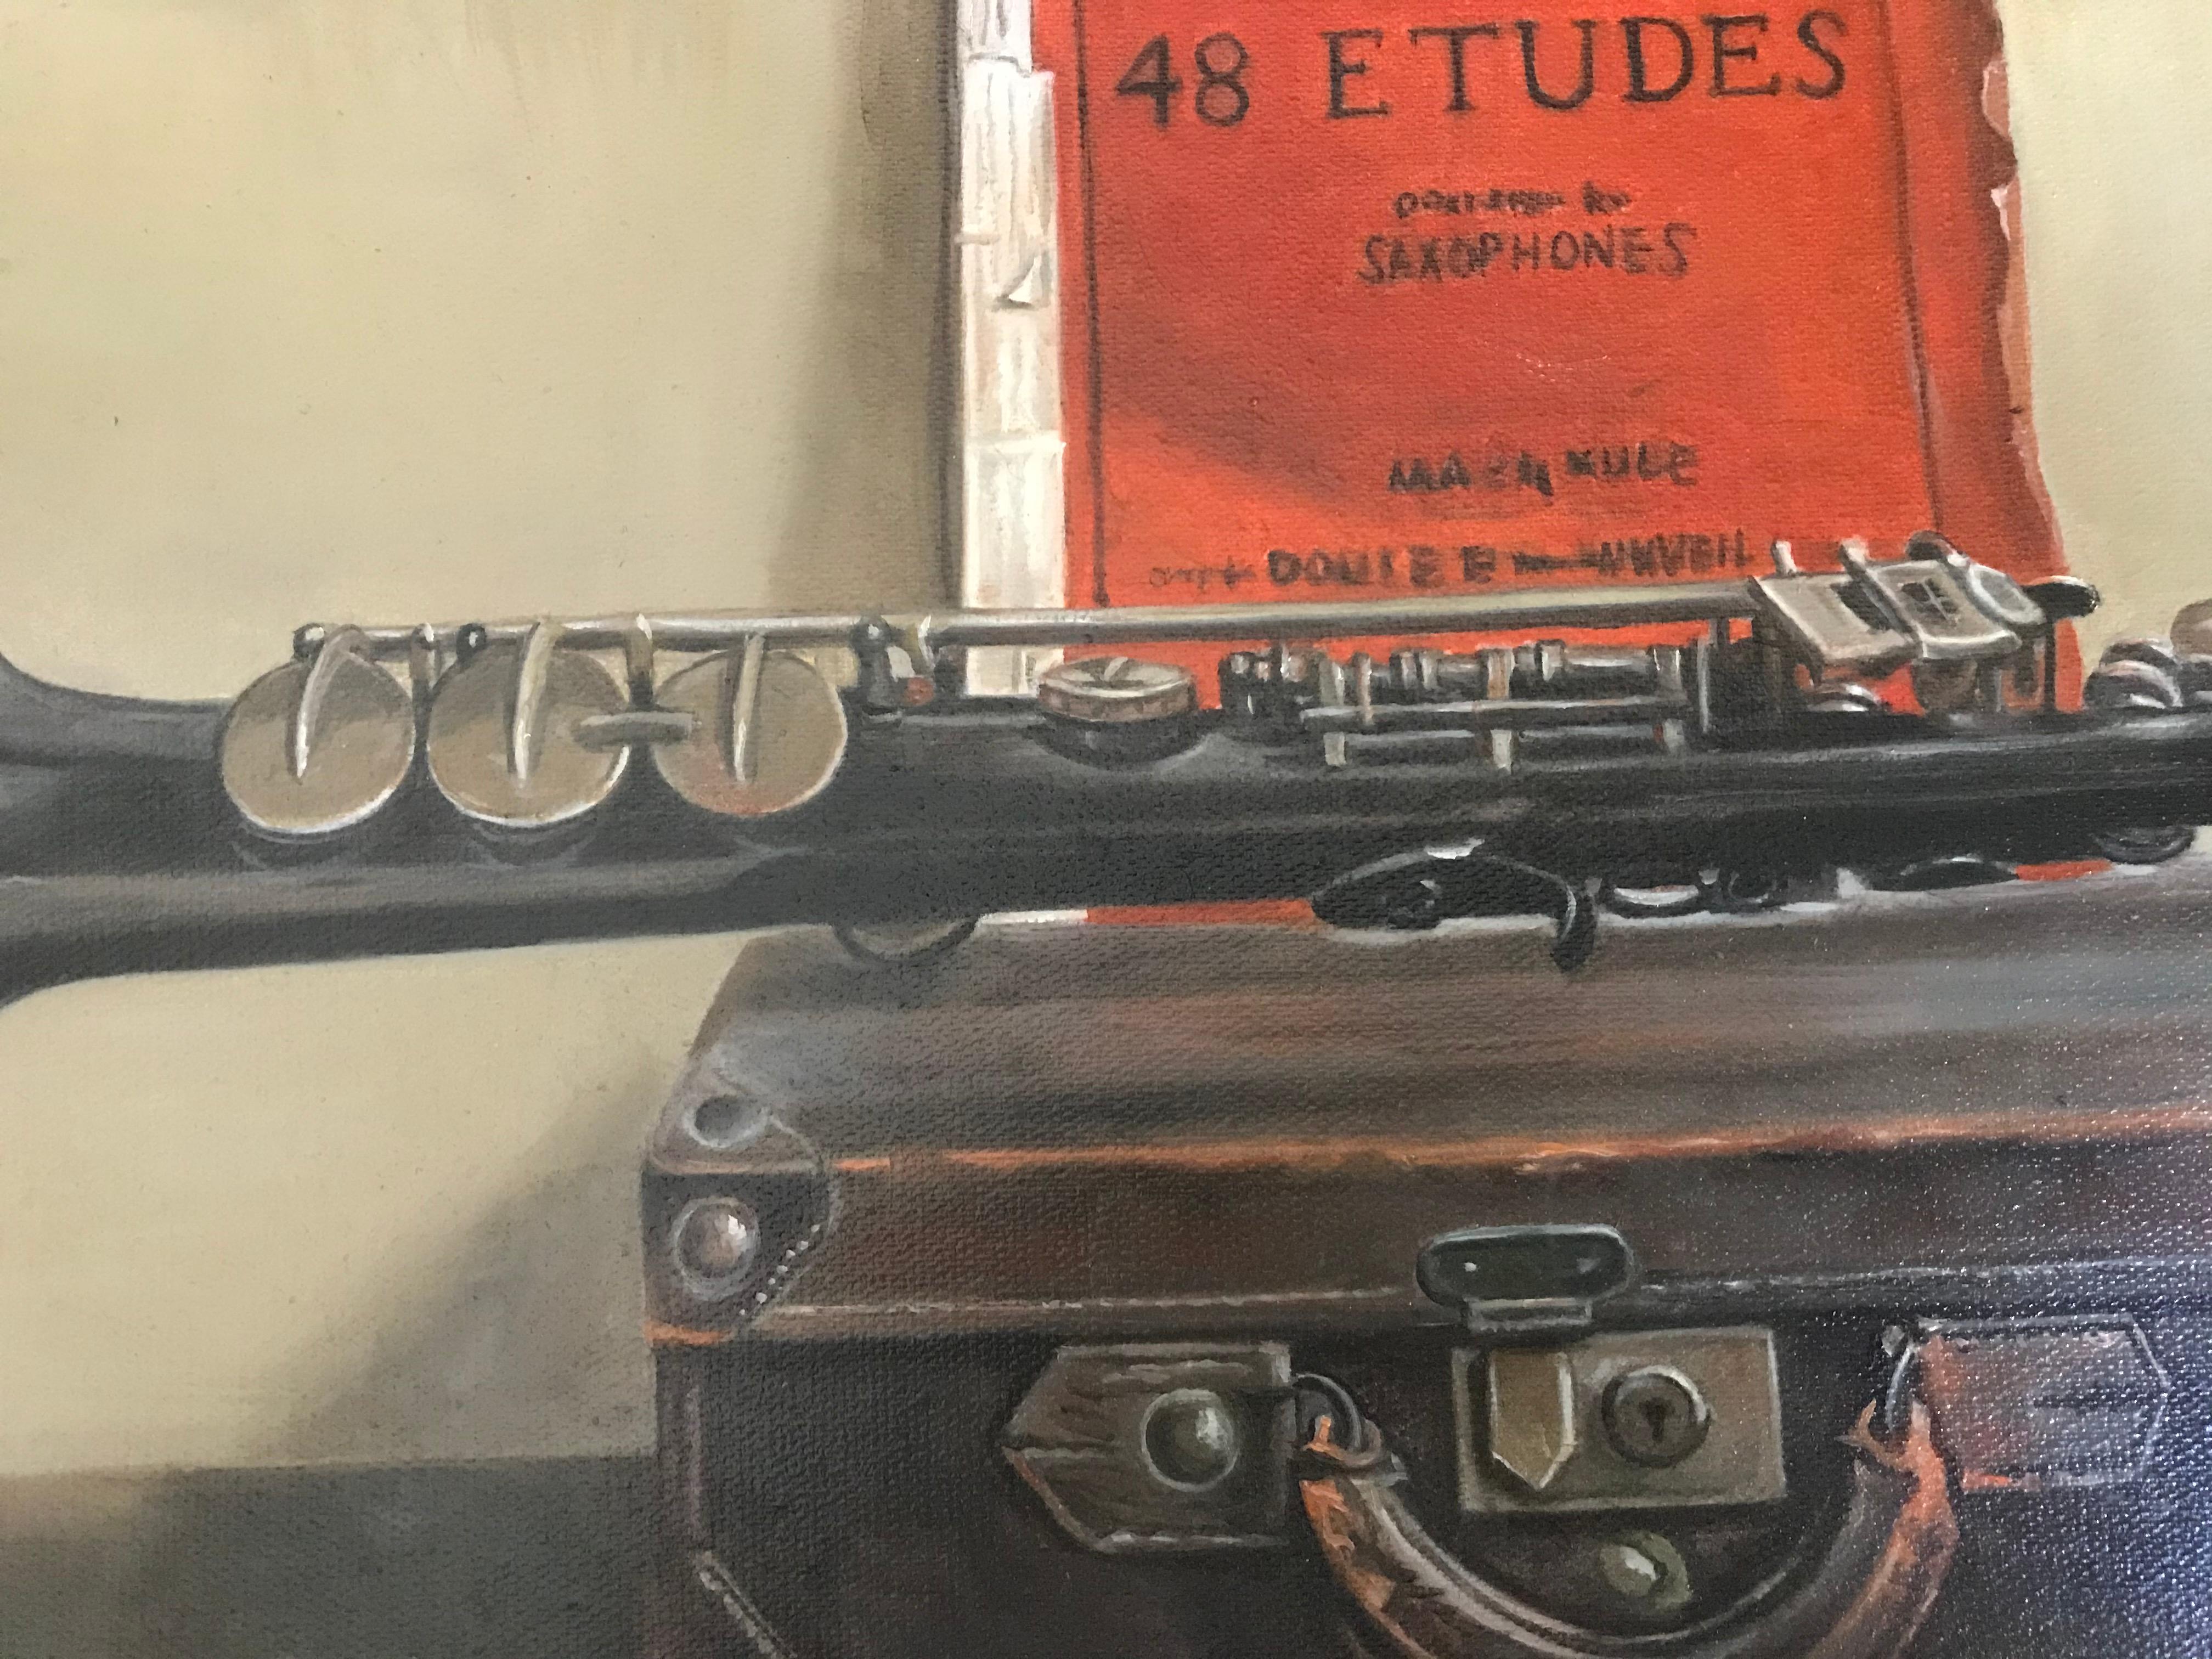 48 Etudes - Painting by Zhang Hui